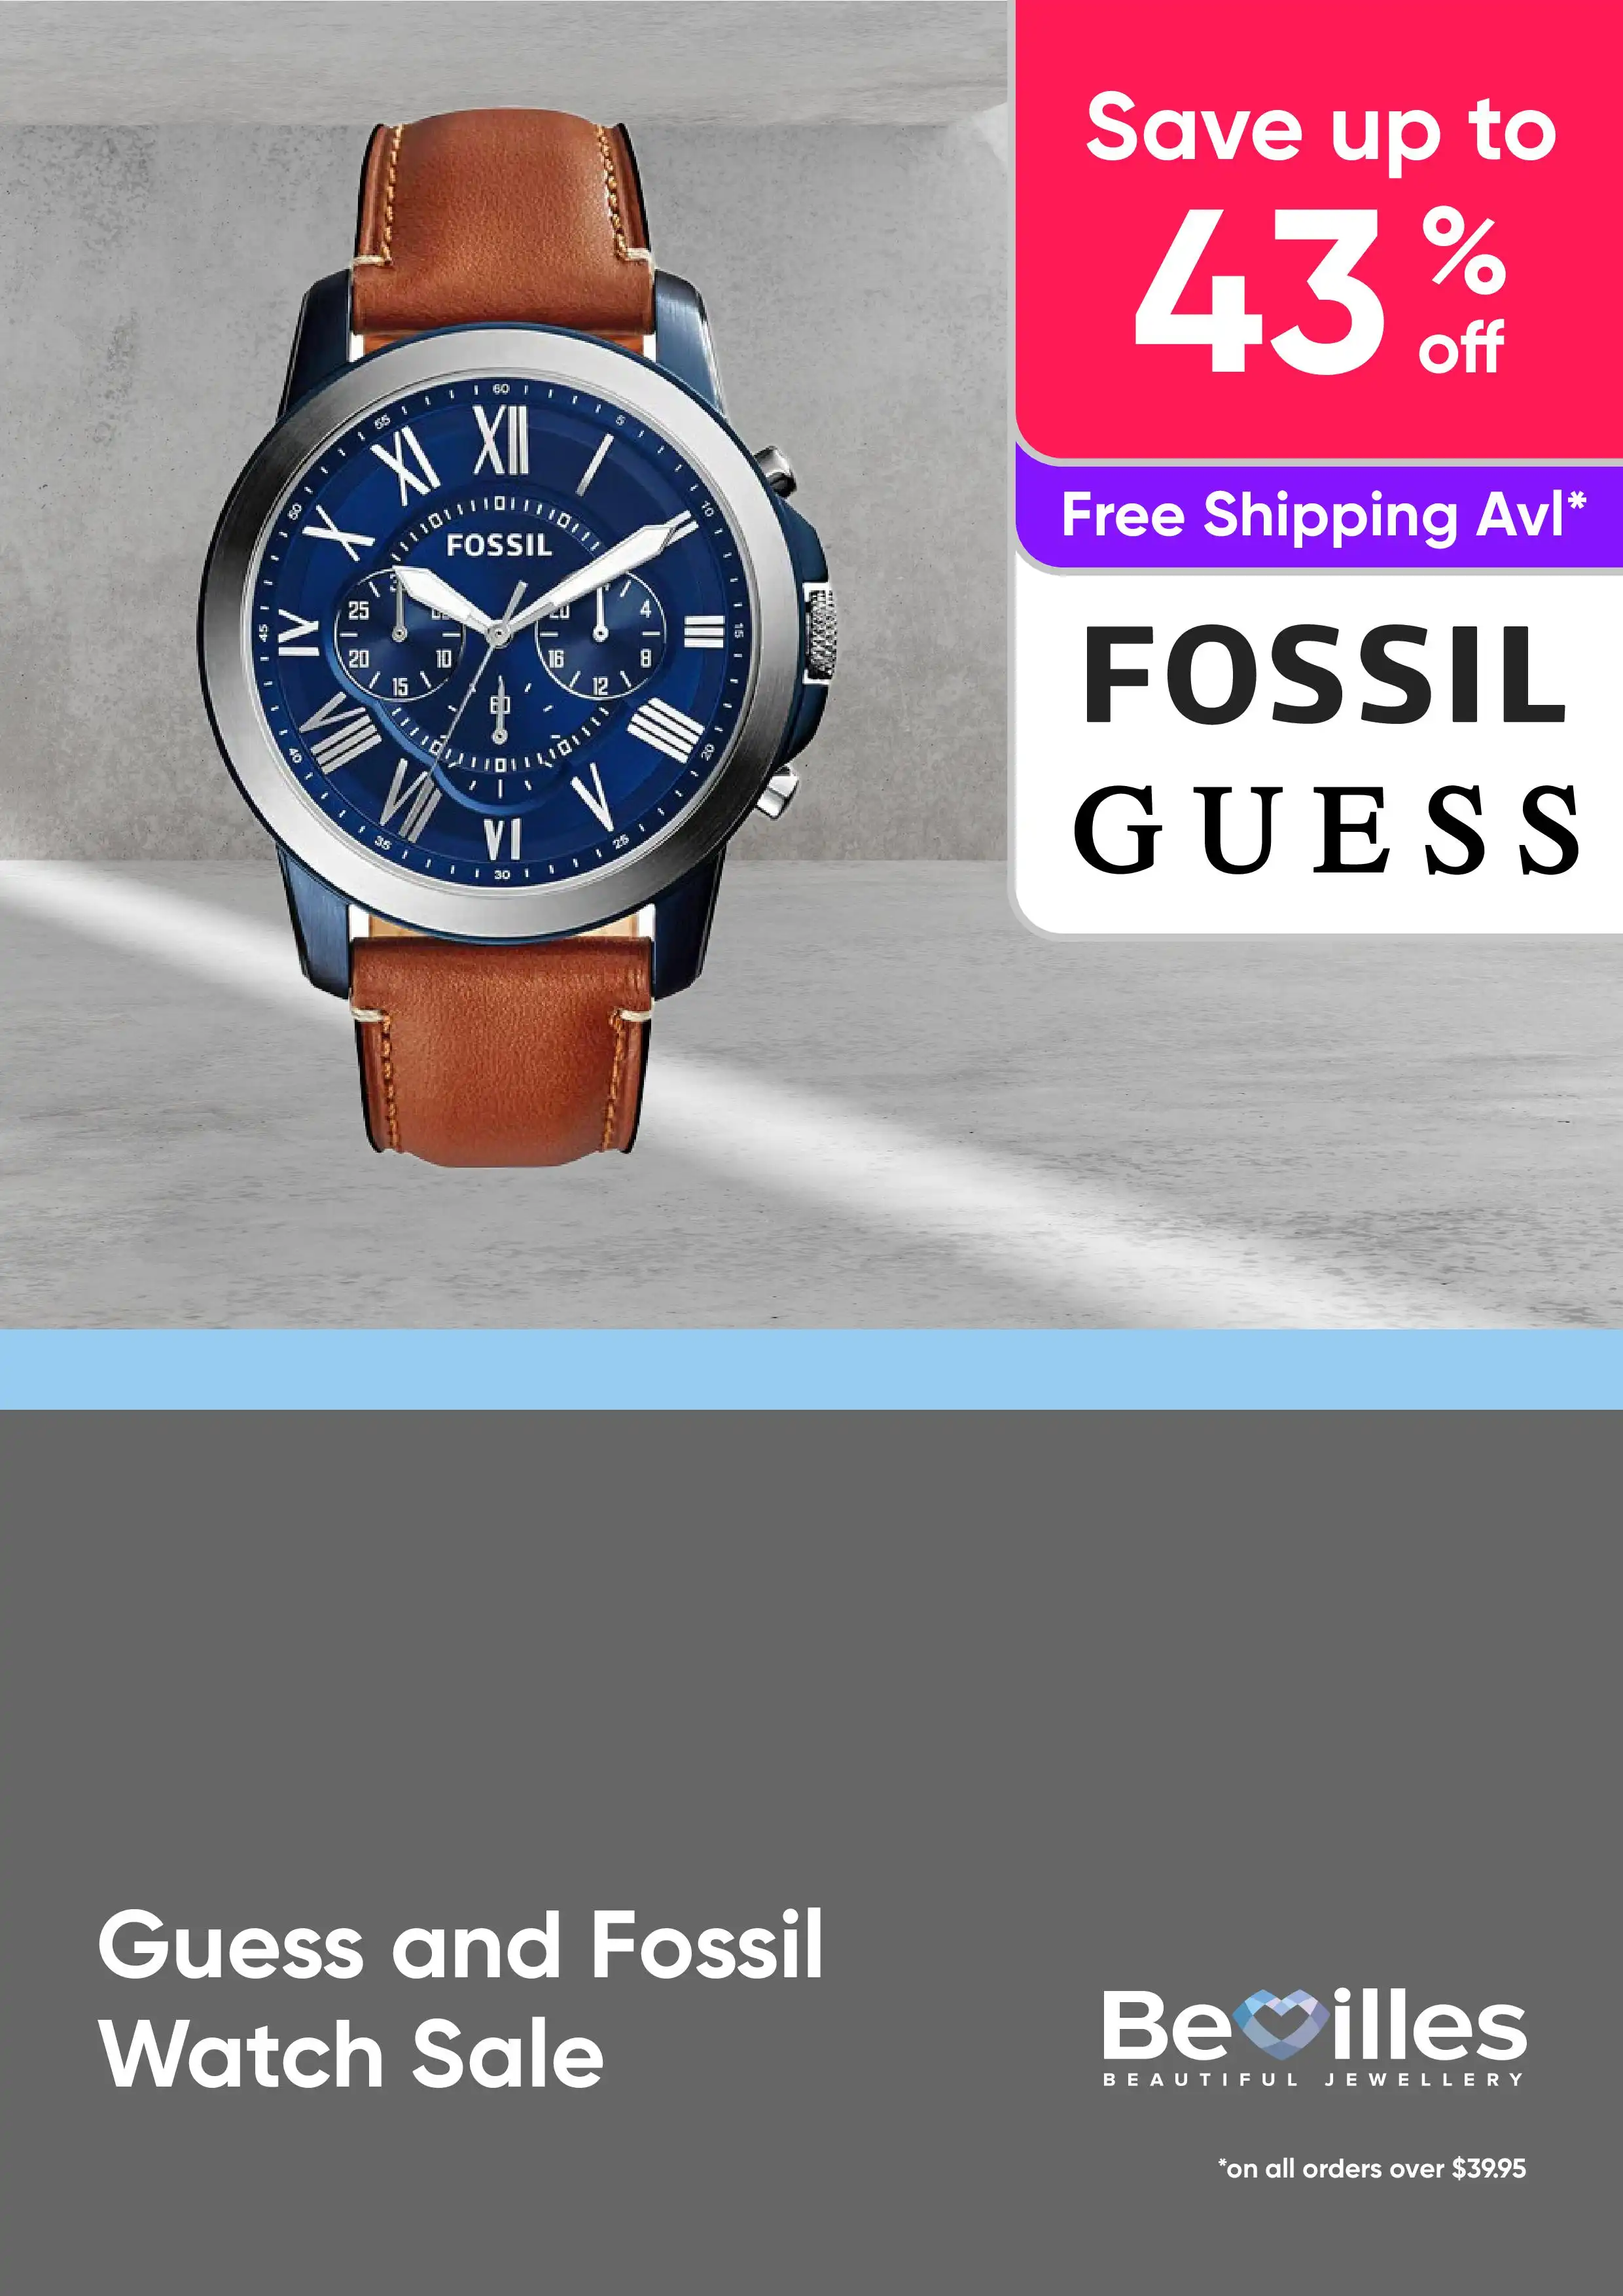 Guess & Fossil Watch Sale - up to 43% off